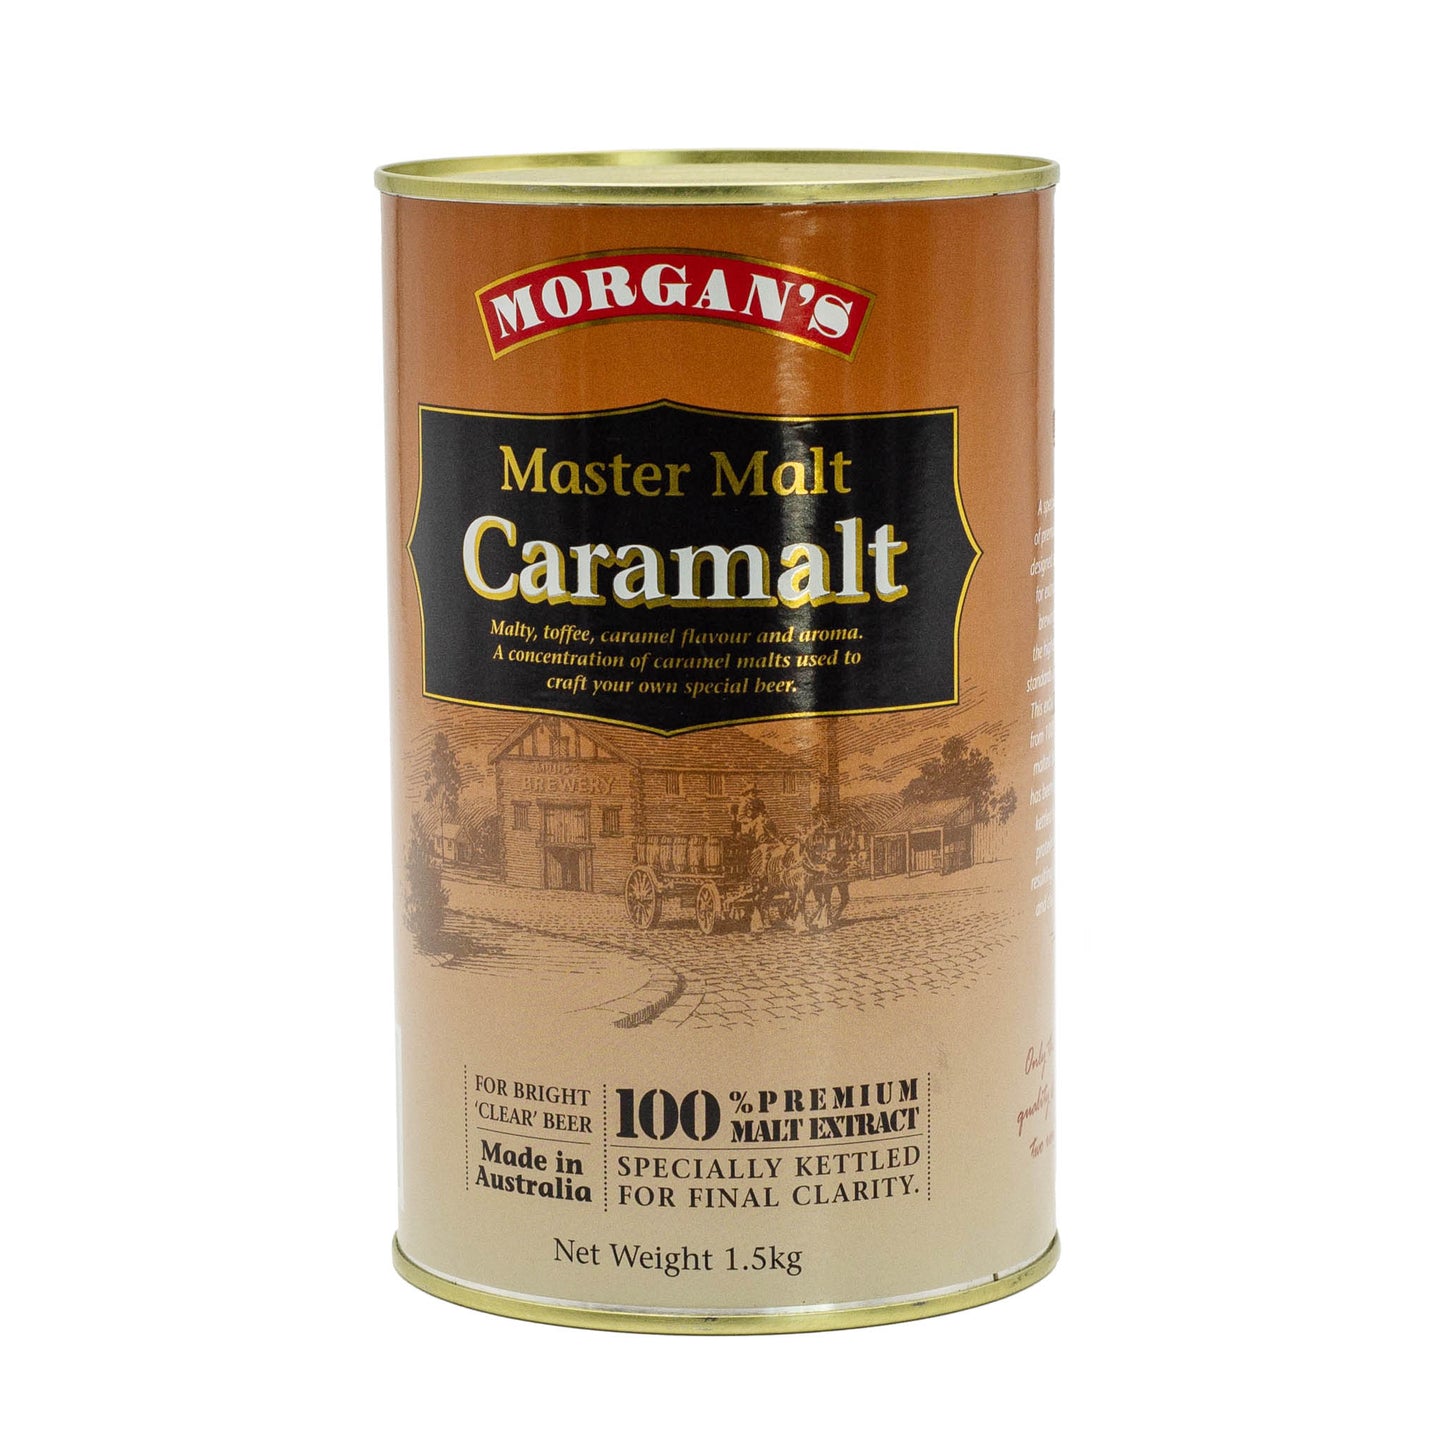 Morgans Master Malts Caramalt brew tin great for a Malty, Toffee, Caramel flavour and aroma